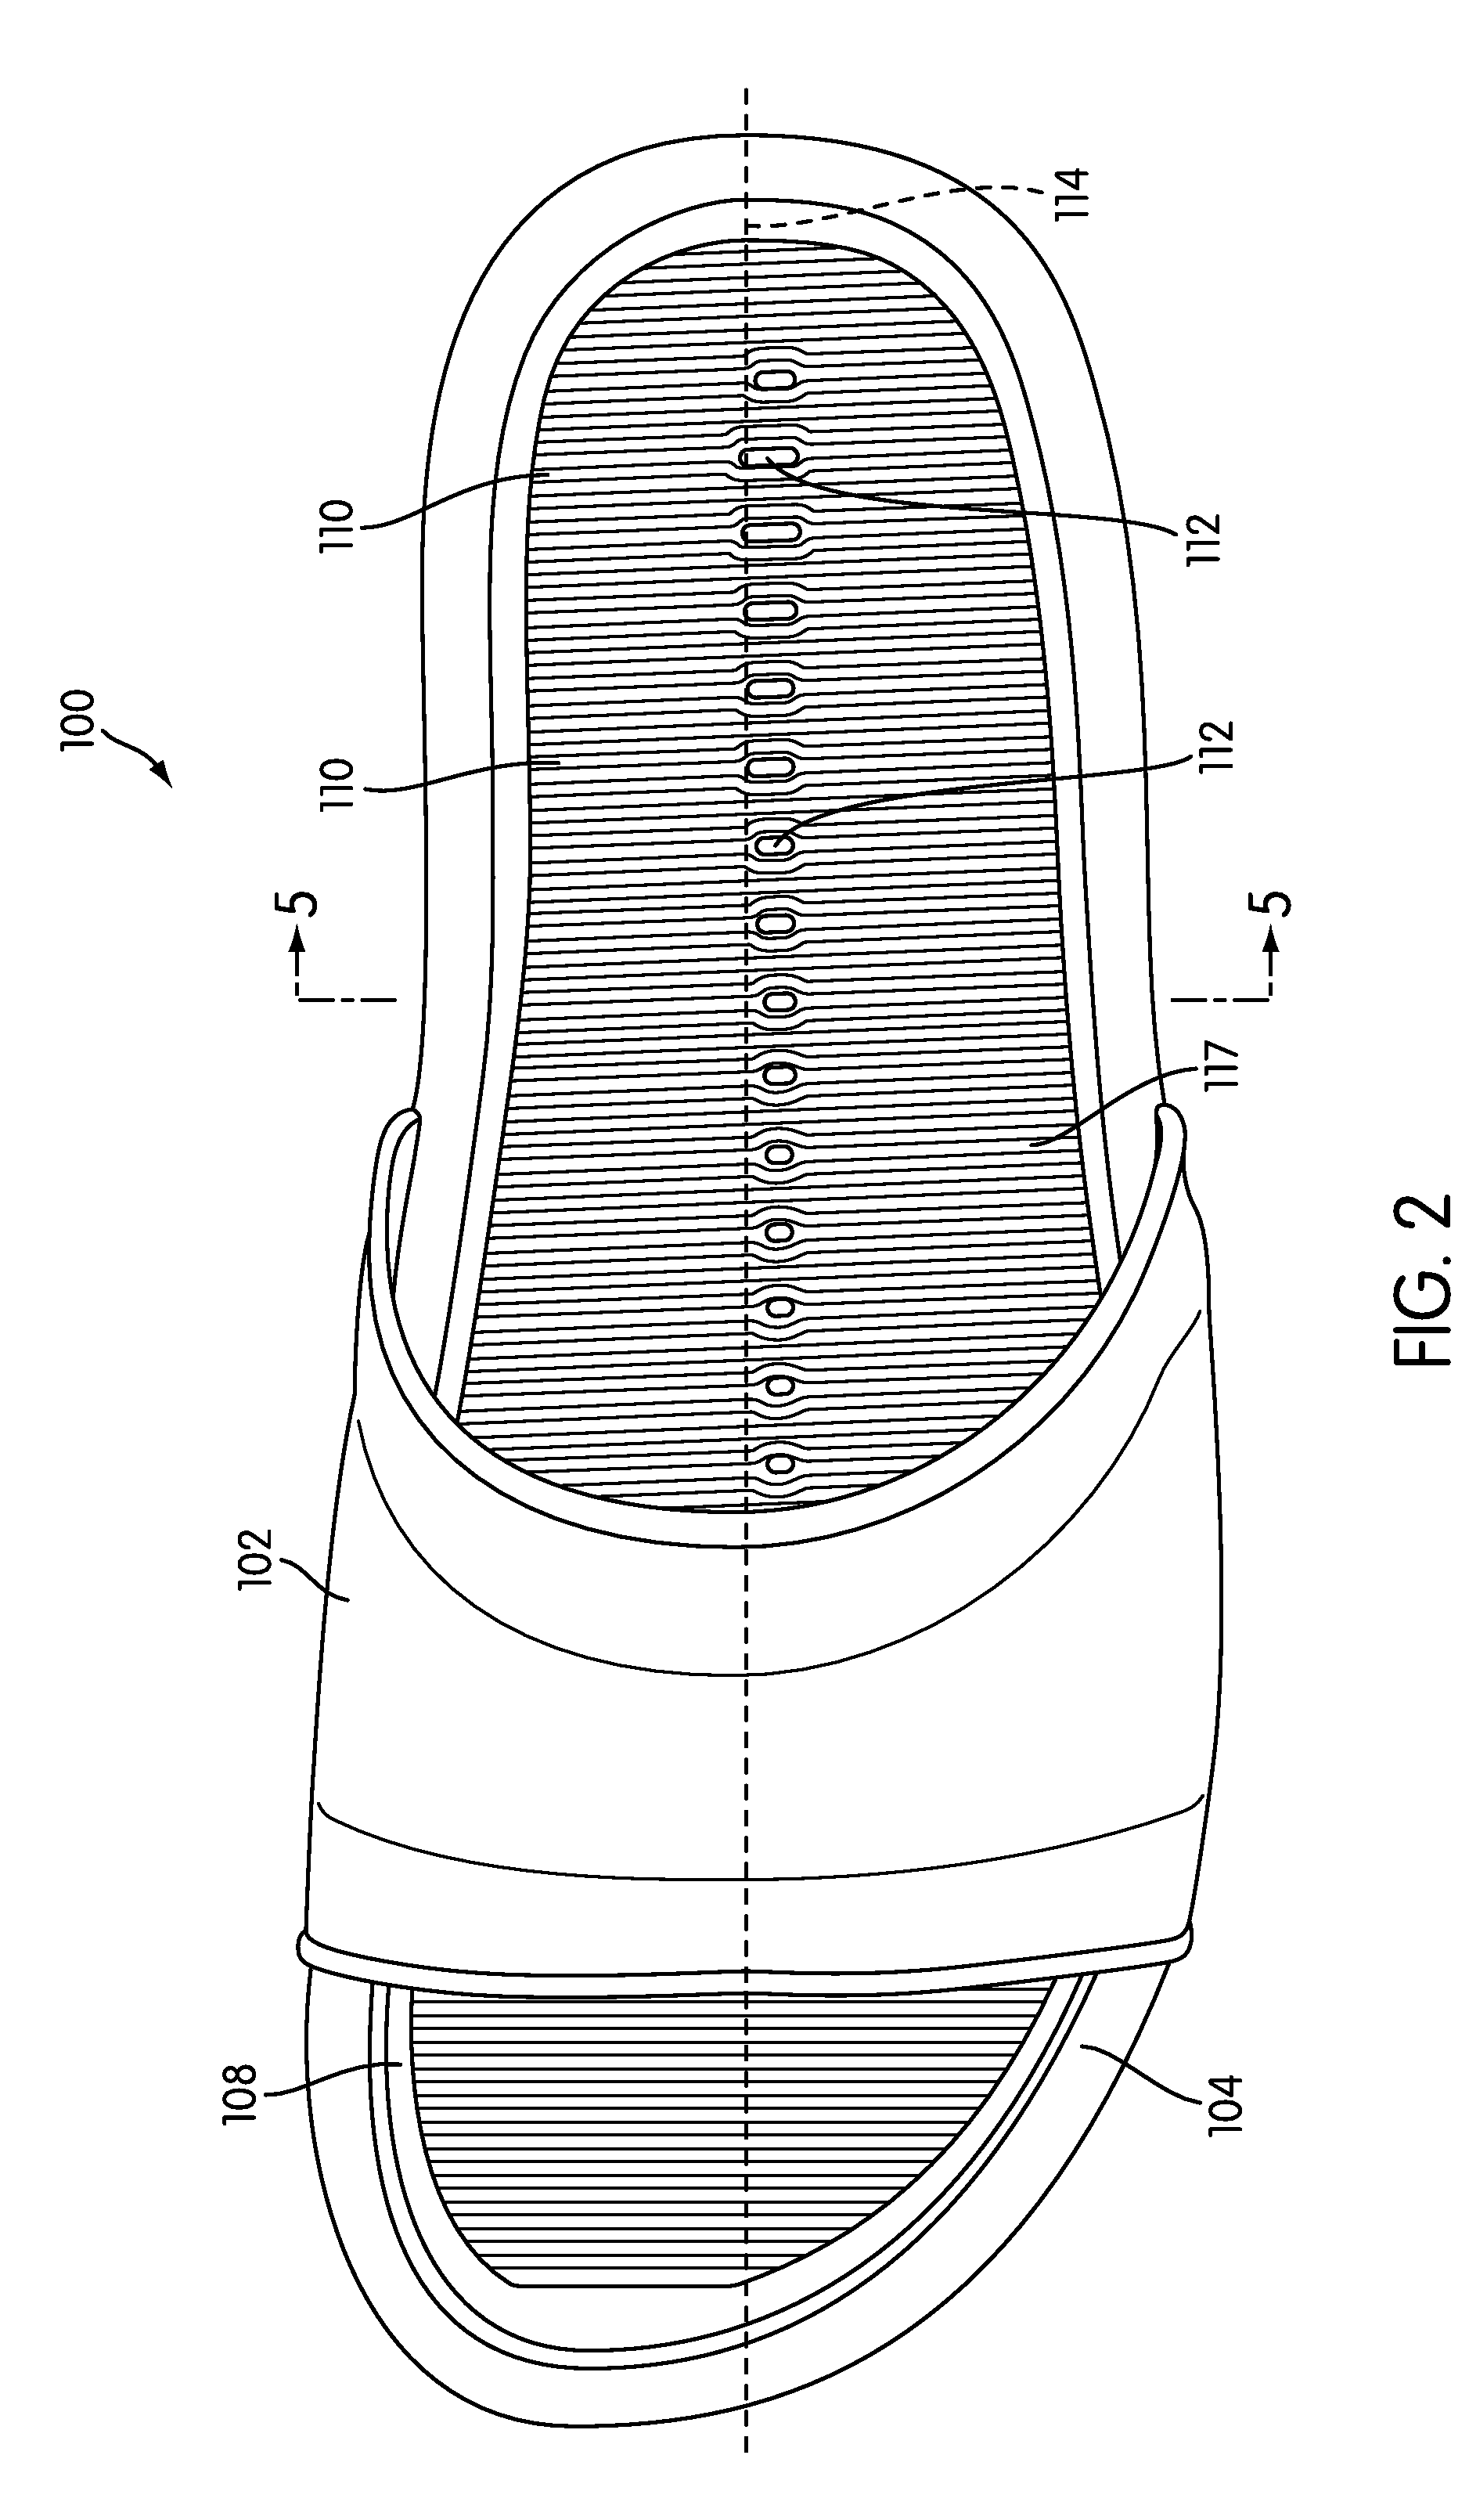 Article of Footwear with Drainage Features